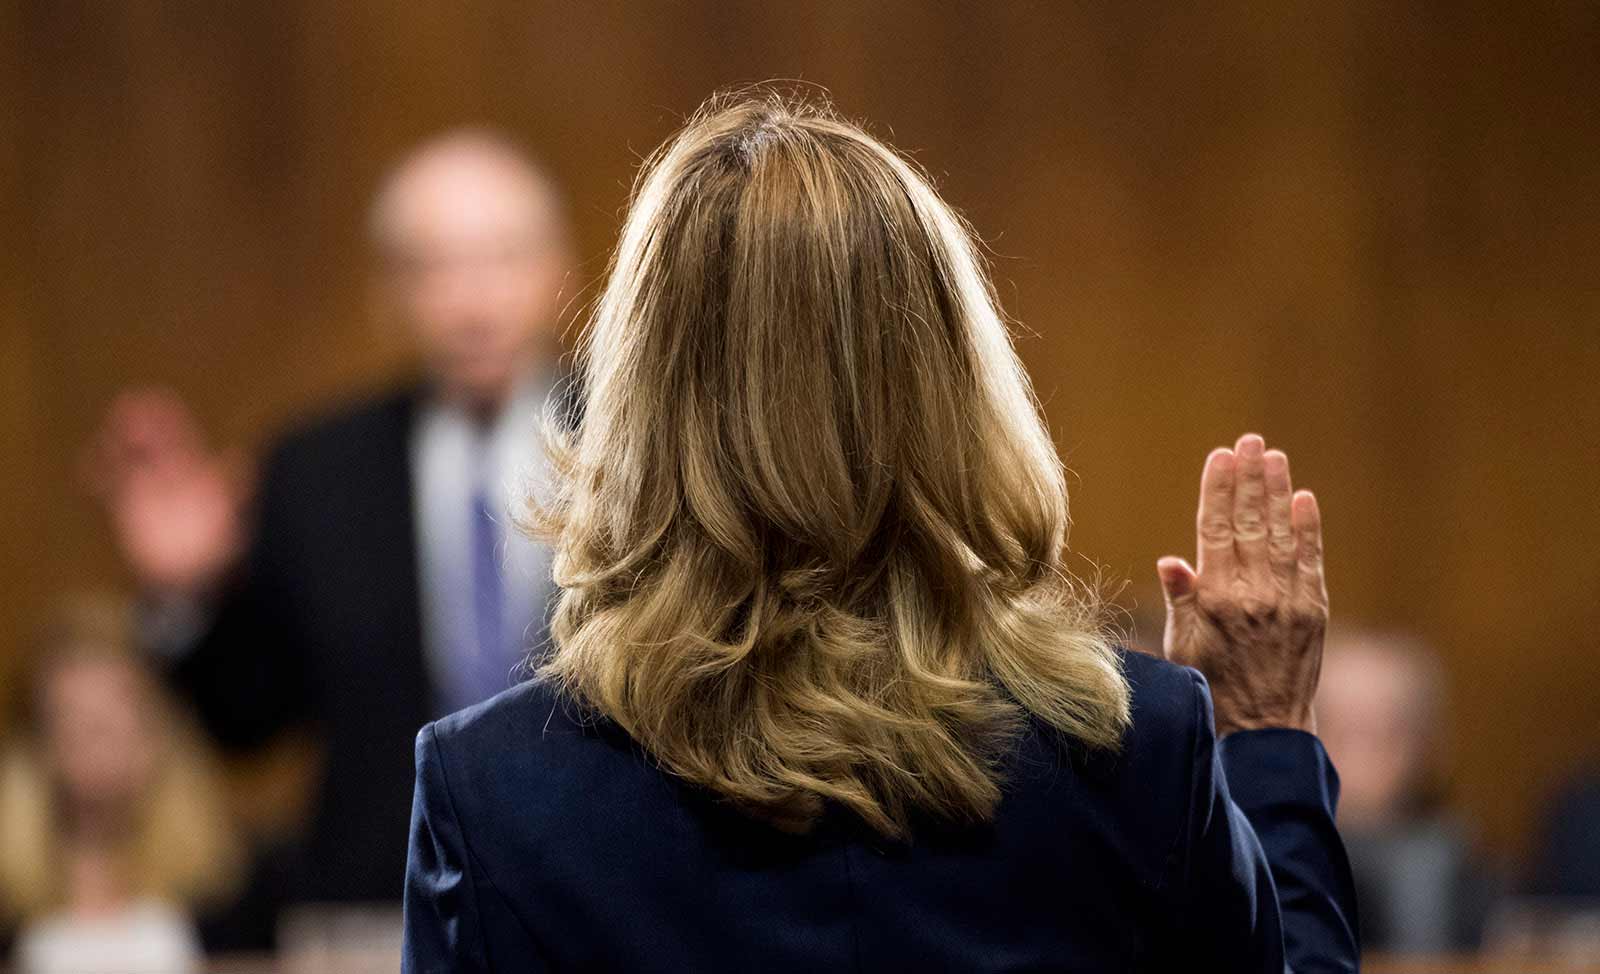 Dr. Christine Blasey Ford being sworn in before testifying during a Senate Judiciary Committee hearing regarding Brett Kavanaugh's Supreme Court nomination, Capitol Hill, Washington, D.C., September 27, 2018